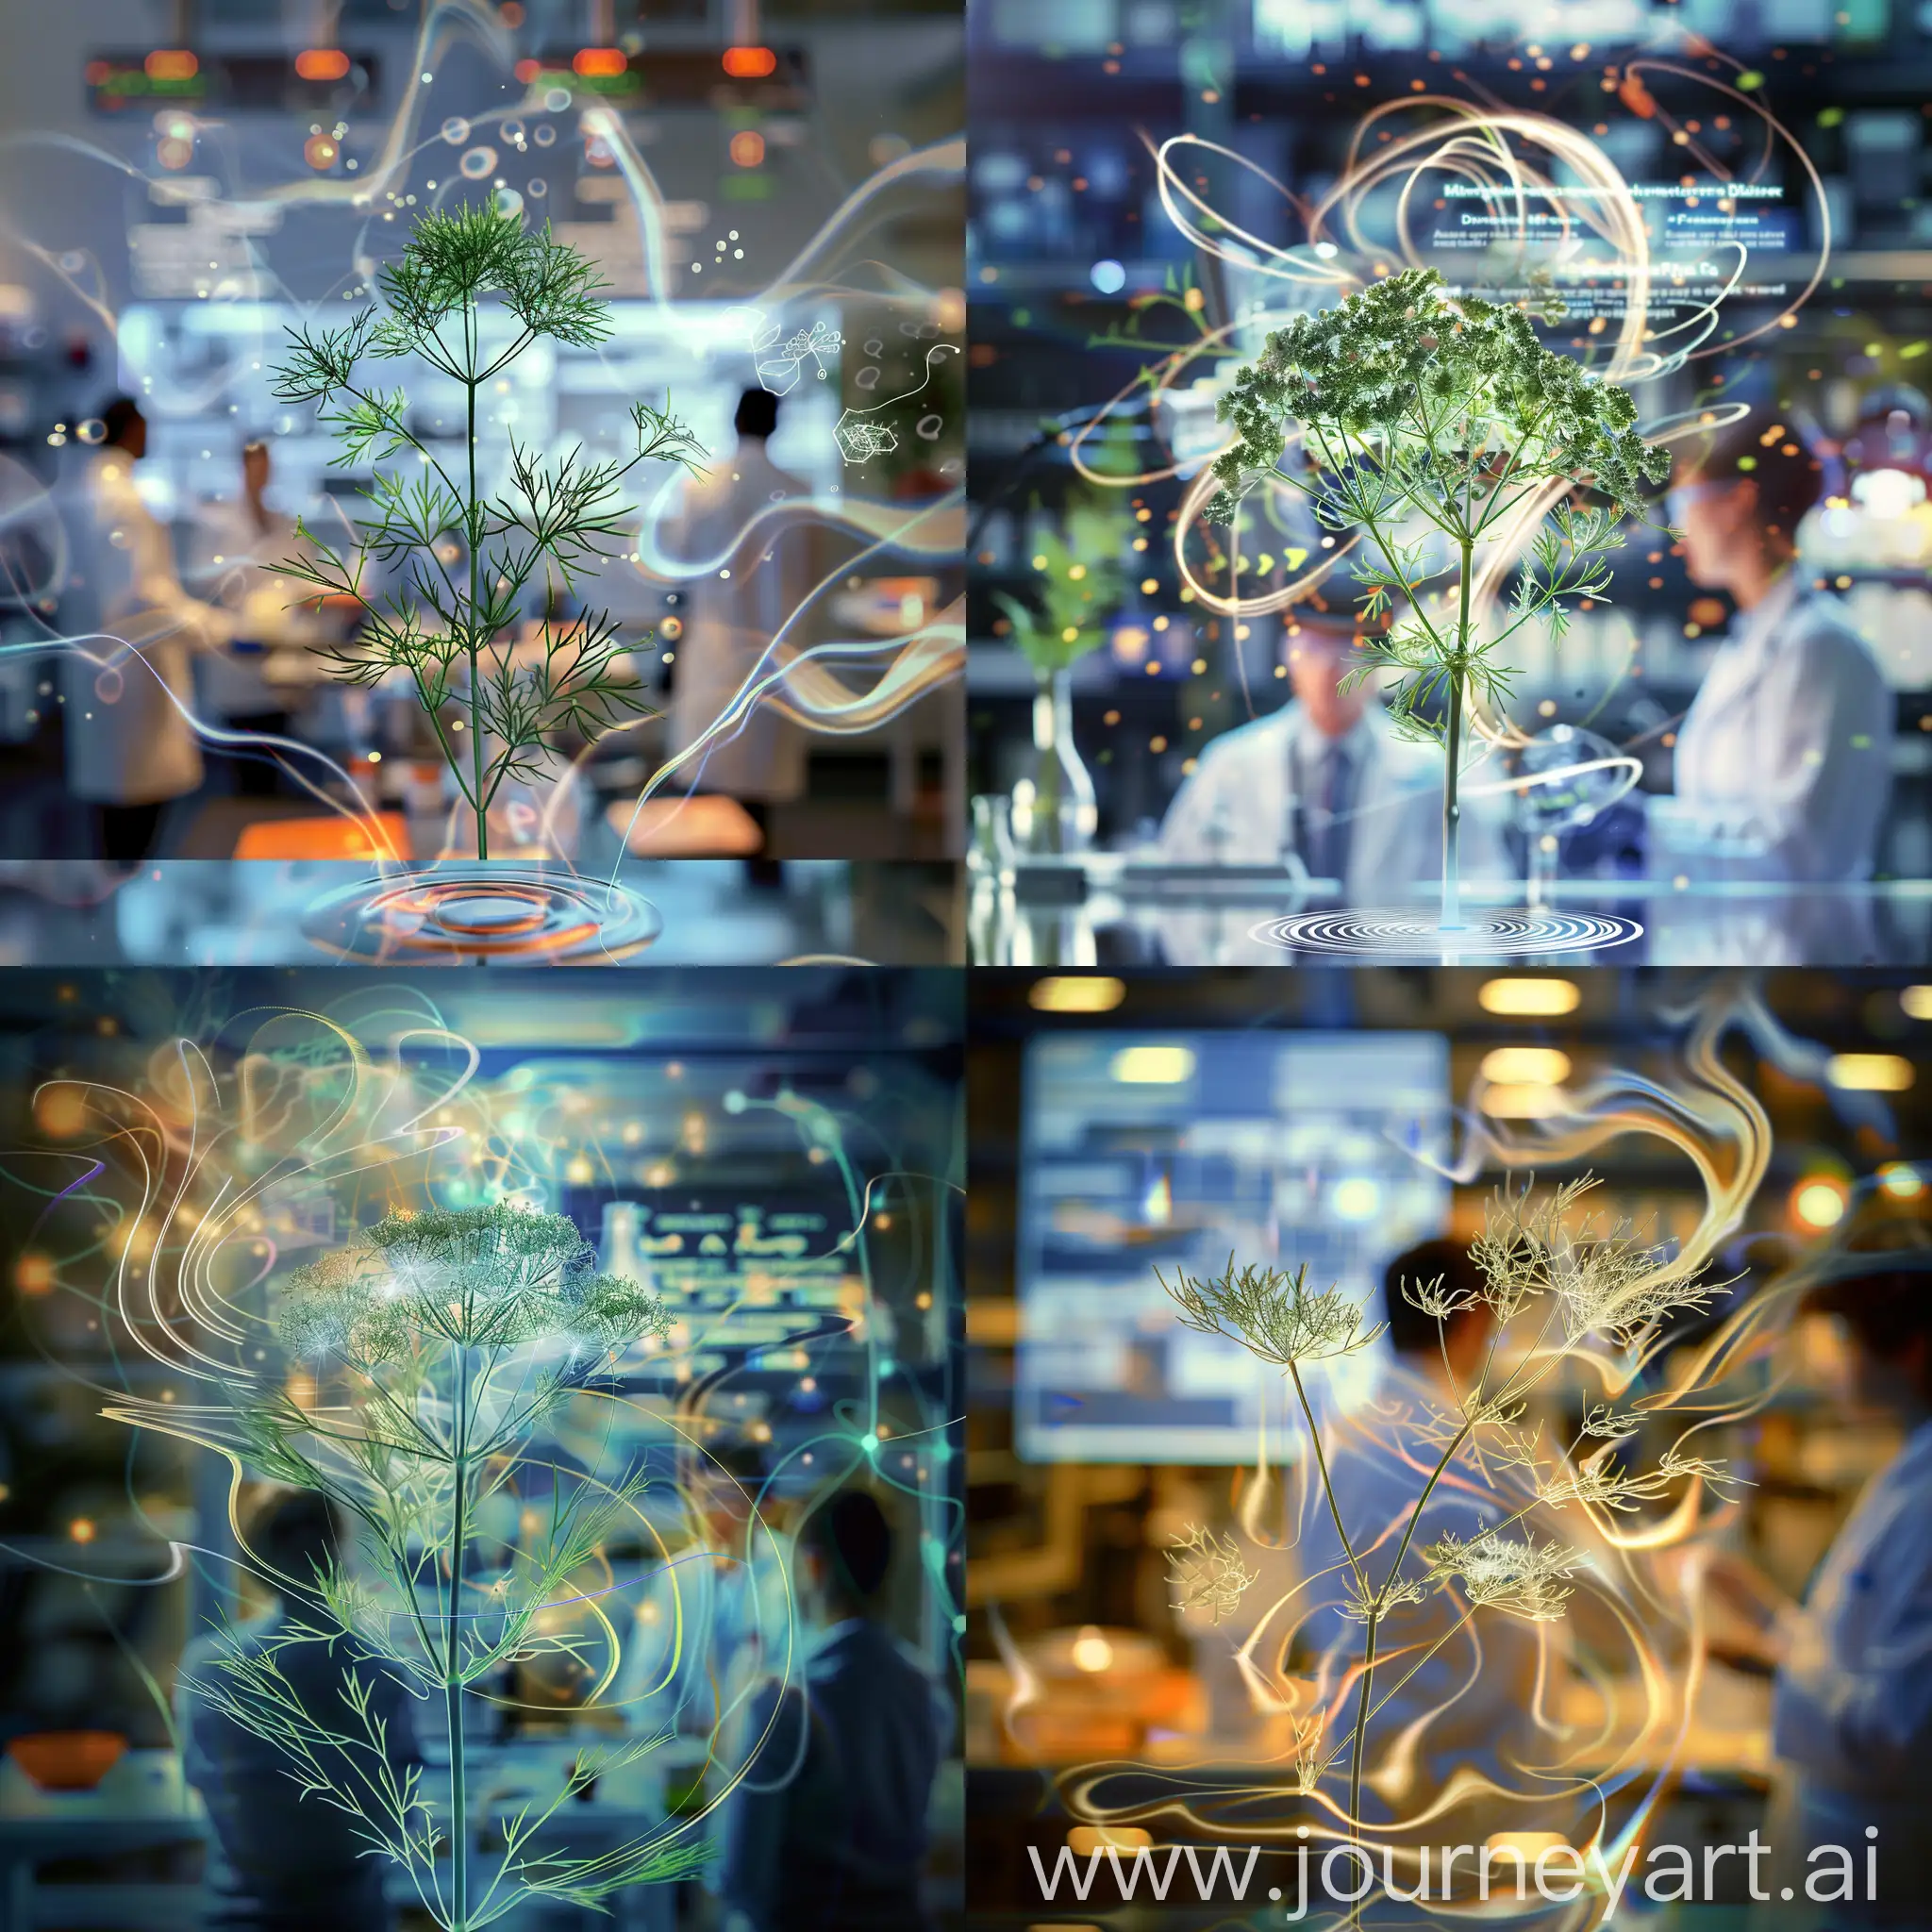 n a modern scientific laboratory, a group of researchers watches with fascination as a sample of dill sits against a blurred backdrop of scientific instruments. The dill plant, with its elegant arrangement of leaves and stems, is surrounded by swirling ferrofluid, forming intricate and beautiful patterns around it. In the background, data on the medicinal uses of dill are projected onto a digital screen, highlighting its healing properties and health benefits. The atmosphere is one of discovery and wonder as the scientists delve into the secrets of this revered plant from ancient times